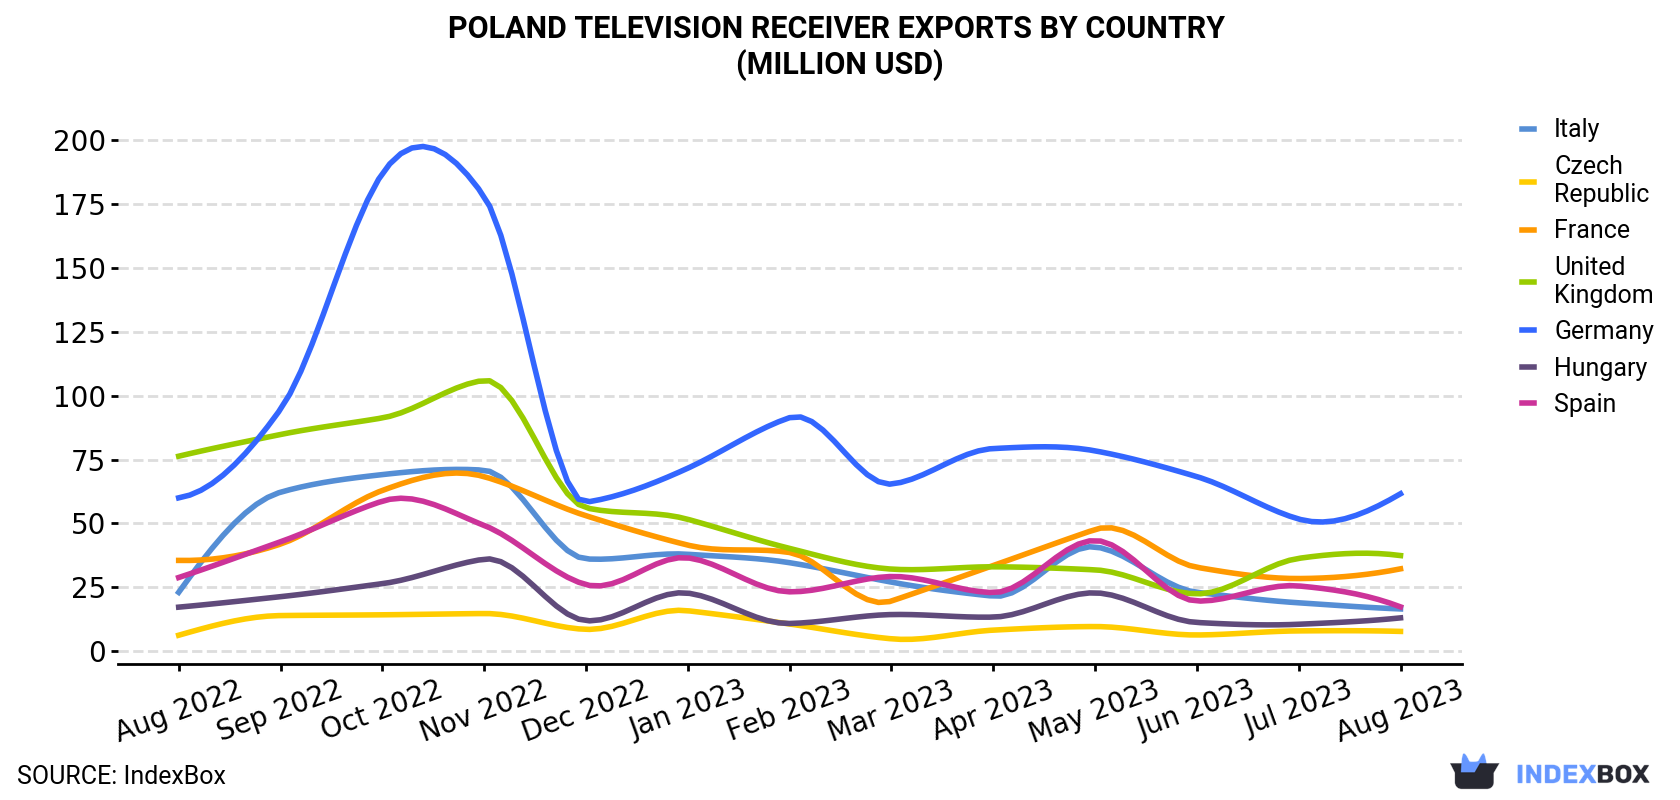 Poland Television Receiver Exports By Country (Million USD)